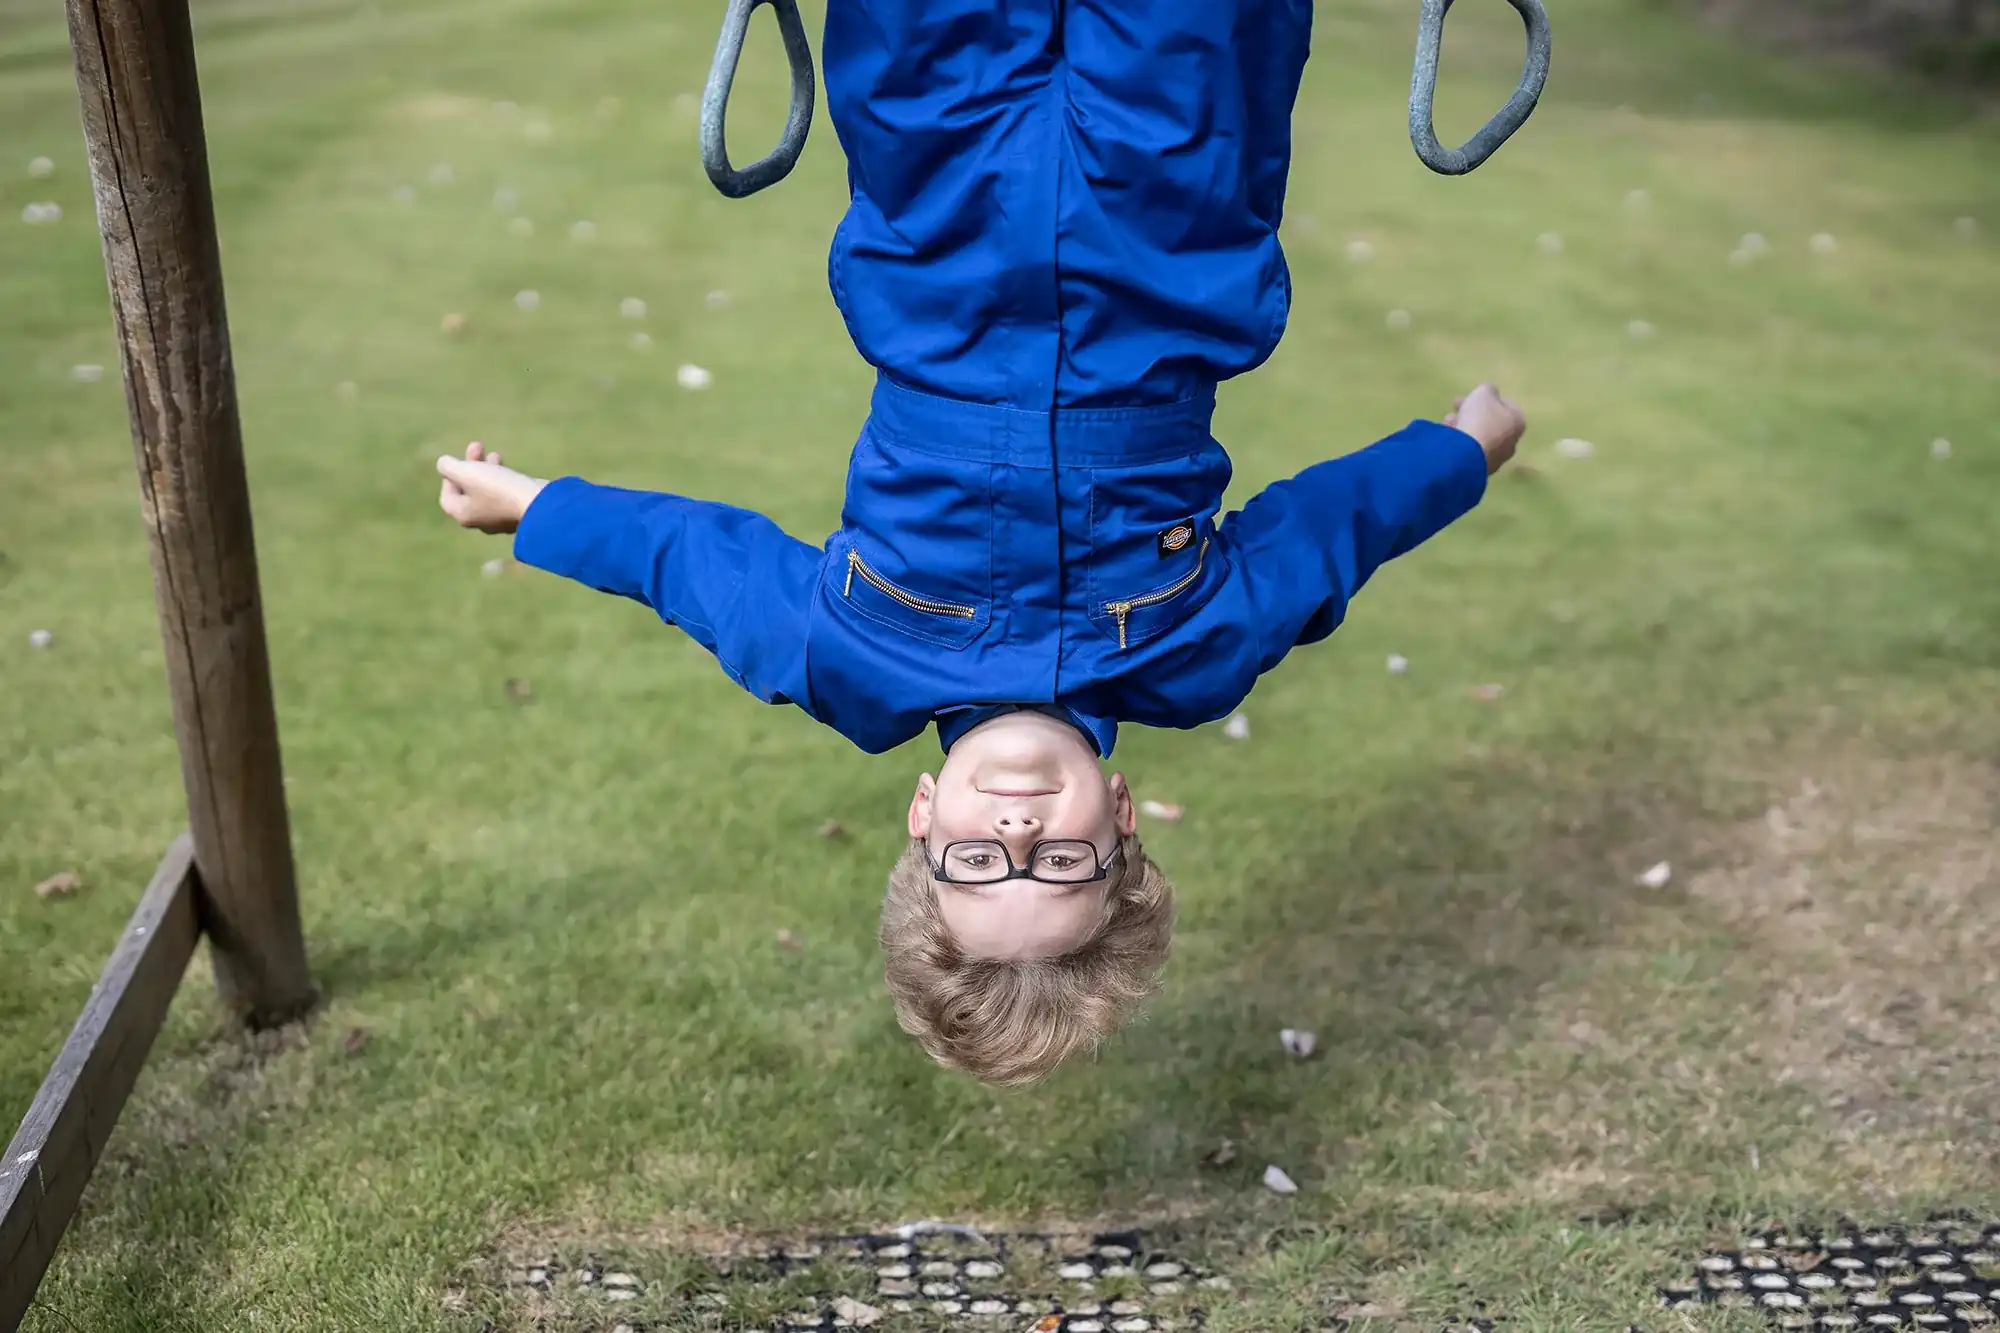 Child wearing glasses and a blue jacket hangs upside down from playground equipment with a grassy background.